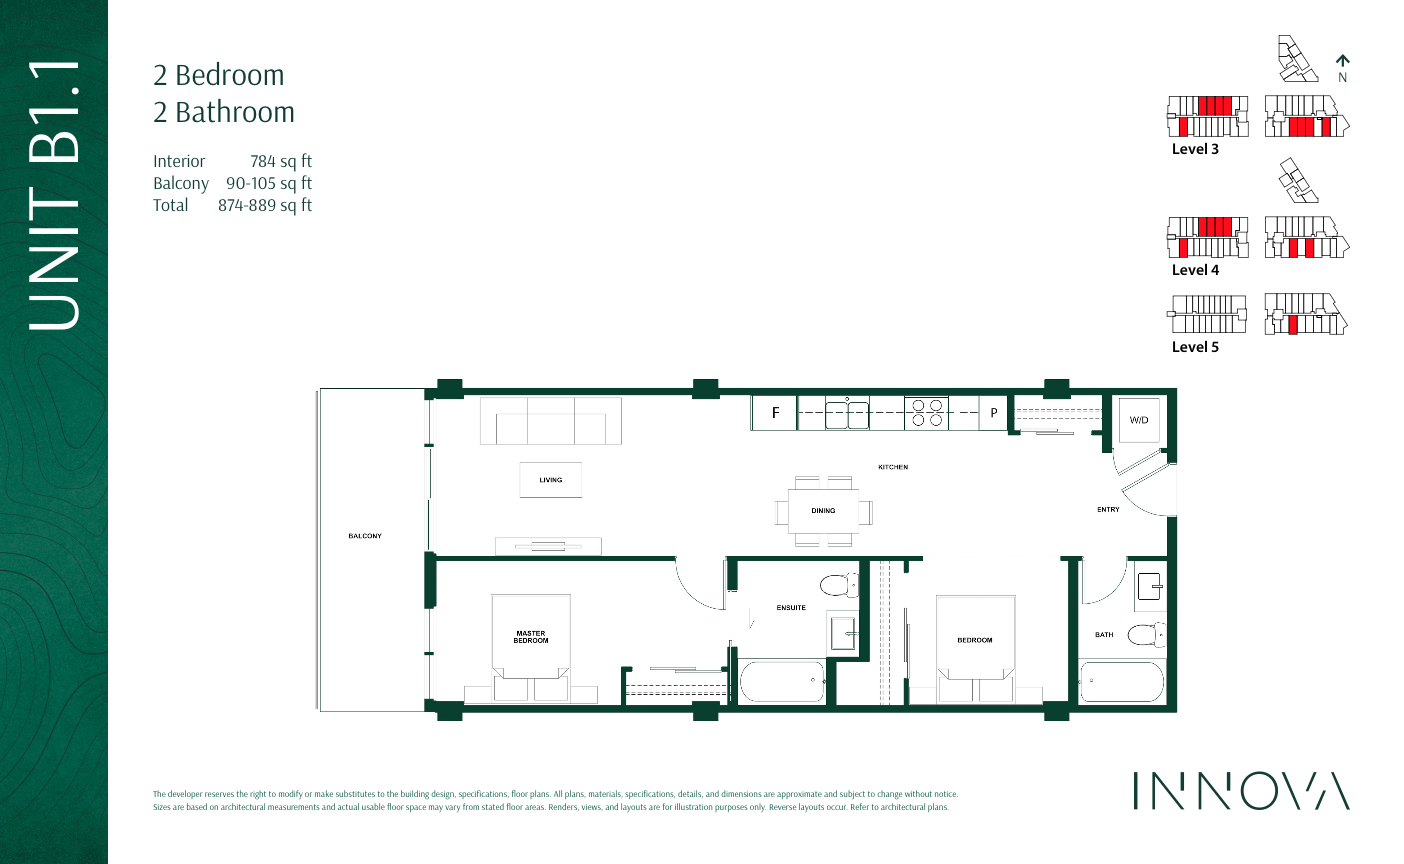  Floor Plan of INNOVA Condos with undefined beds